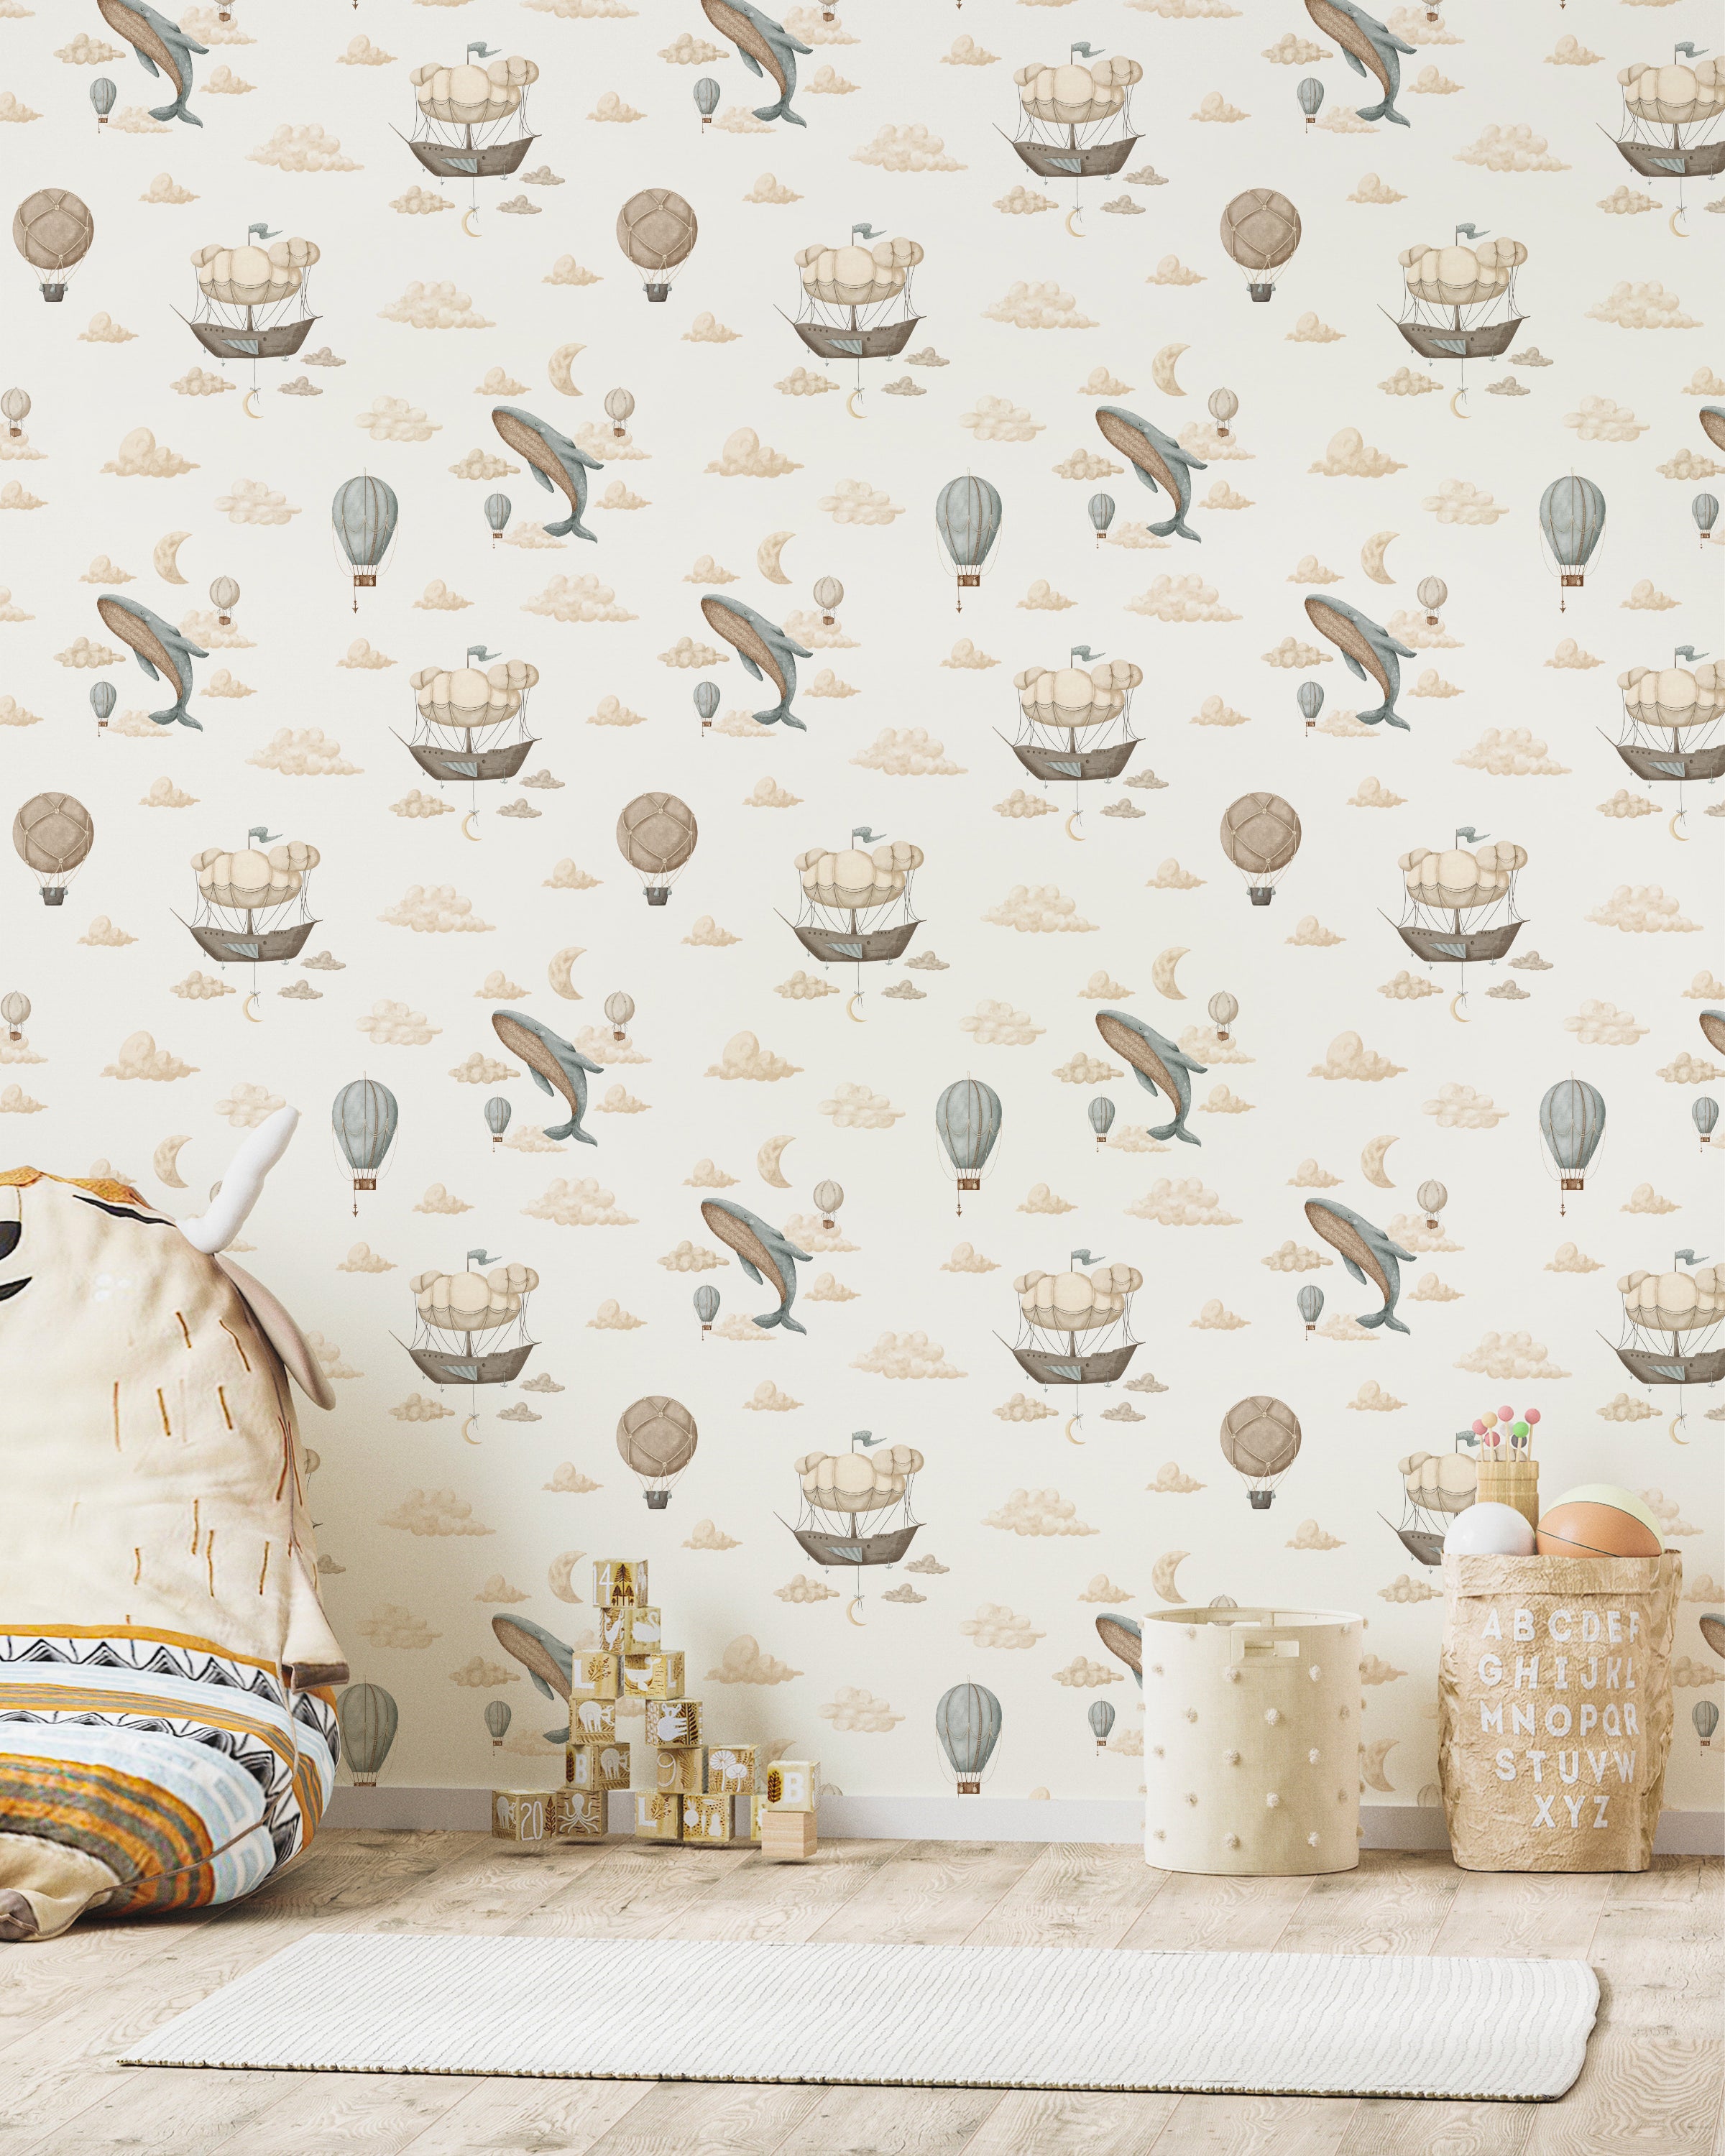 A playful nursery with Cloudy Voyages Wallpaper, adorned with whimsical airships, balloons, and clouds. Soft toys and blocks enhance the room's enchanting atmosphere.